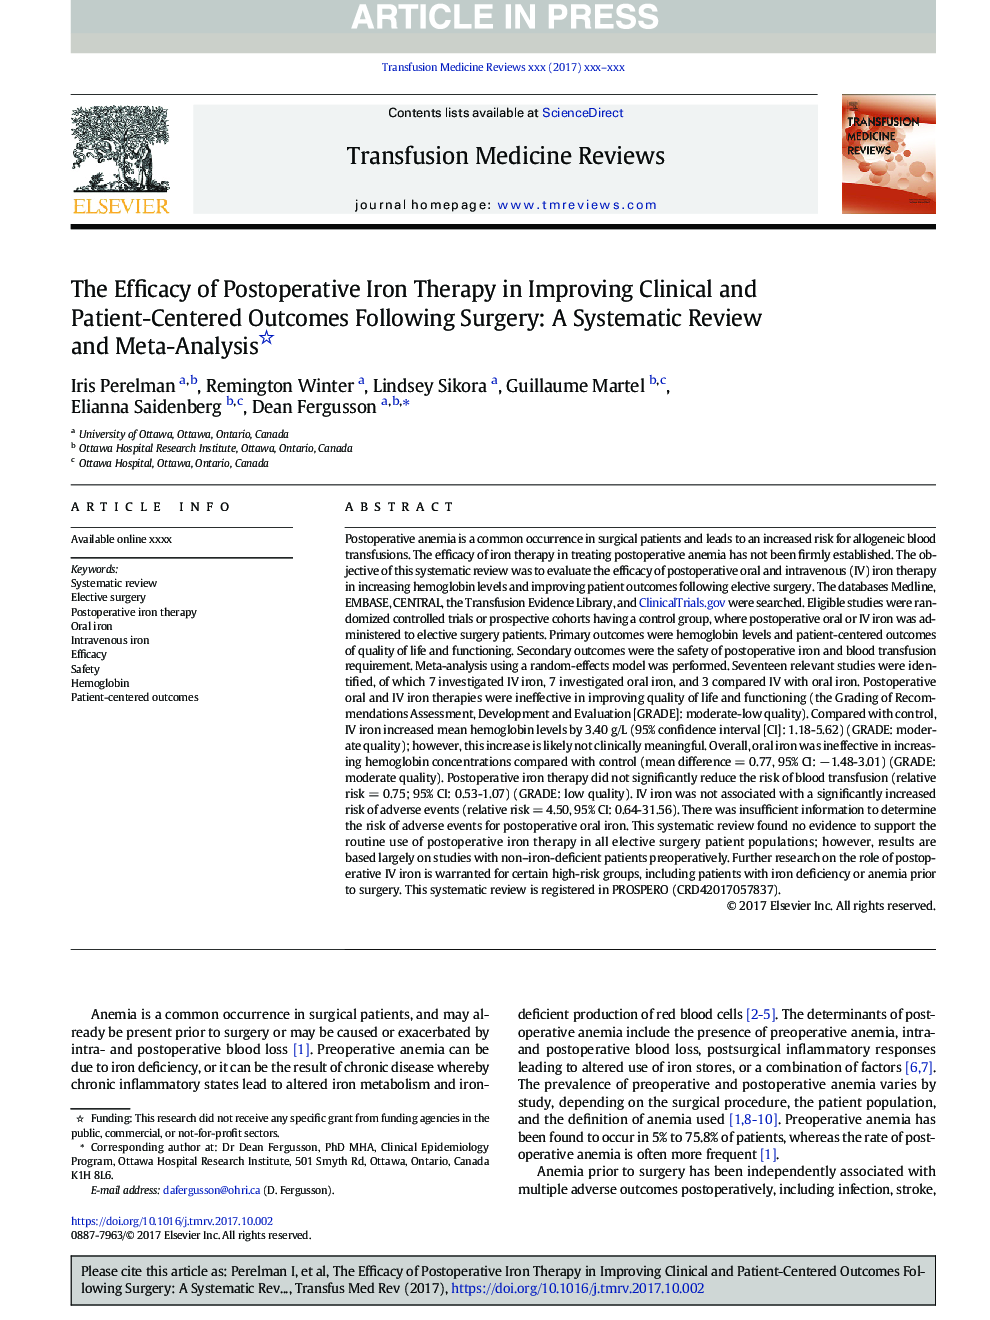 The Efficacy of Postoperative Iron Therapy in Improving Clinical and Patient-Centered Outcomes Following Surgery: A Systematic Review and Meta-Analysis